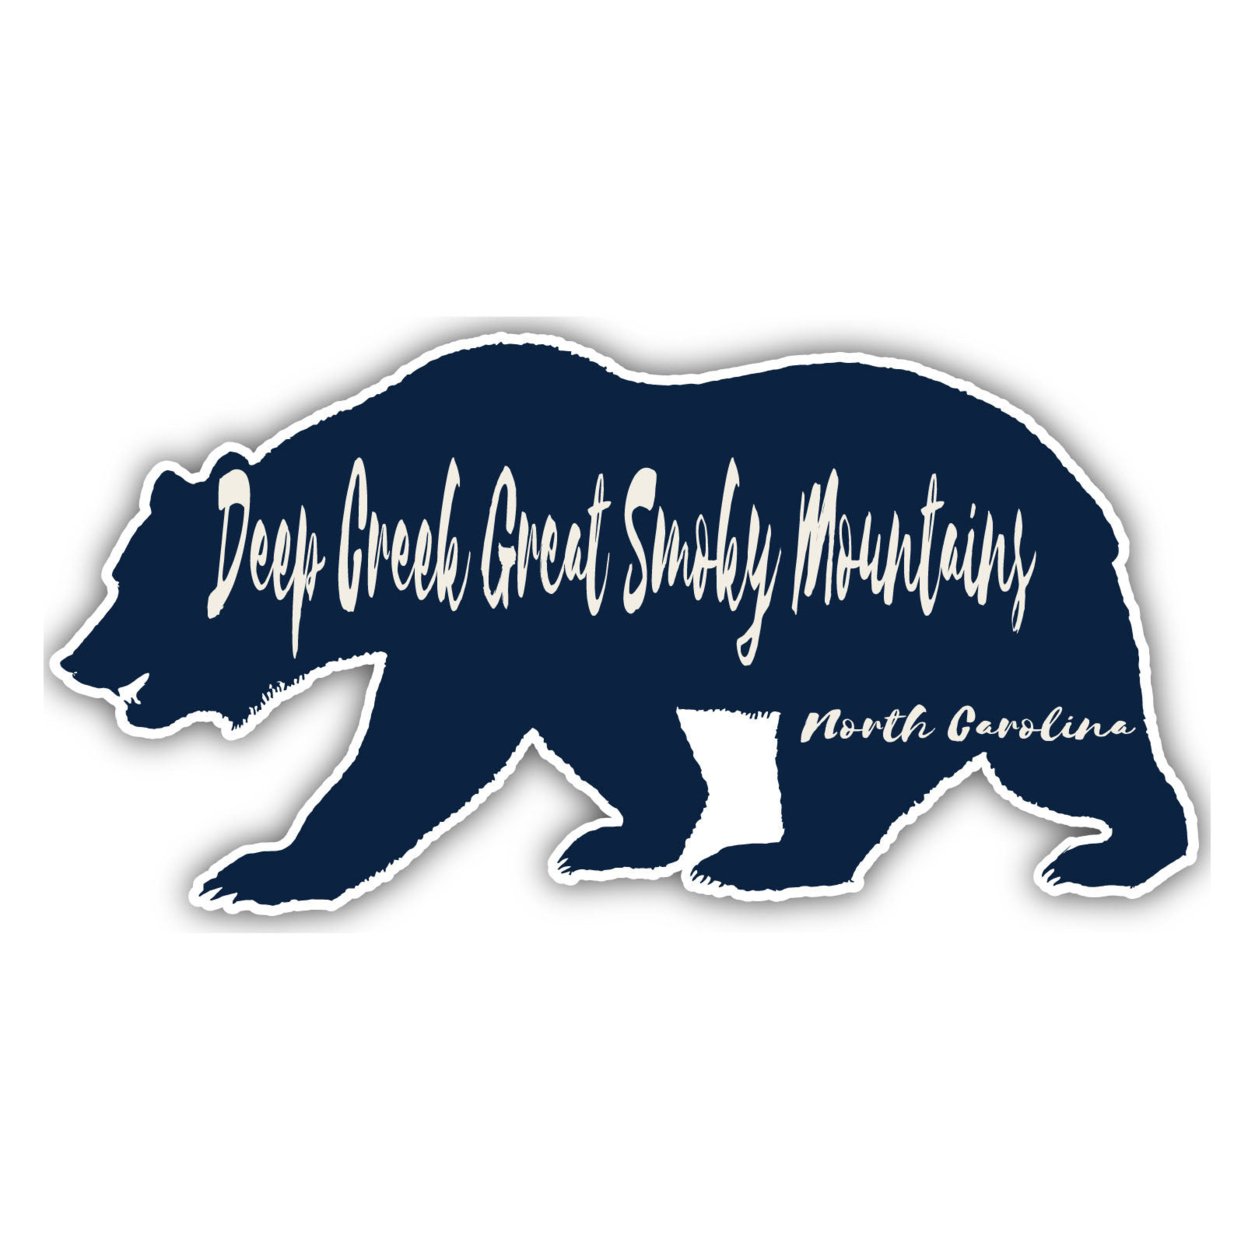 Deep Creek Great Smoky Mountains North Carolina Souvenir Decorative Stickers (Choose Theme And Size) - 4-Pack, 8-Inch, Bear